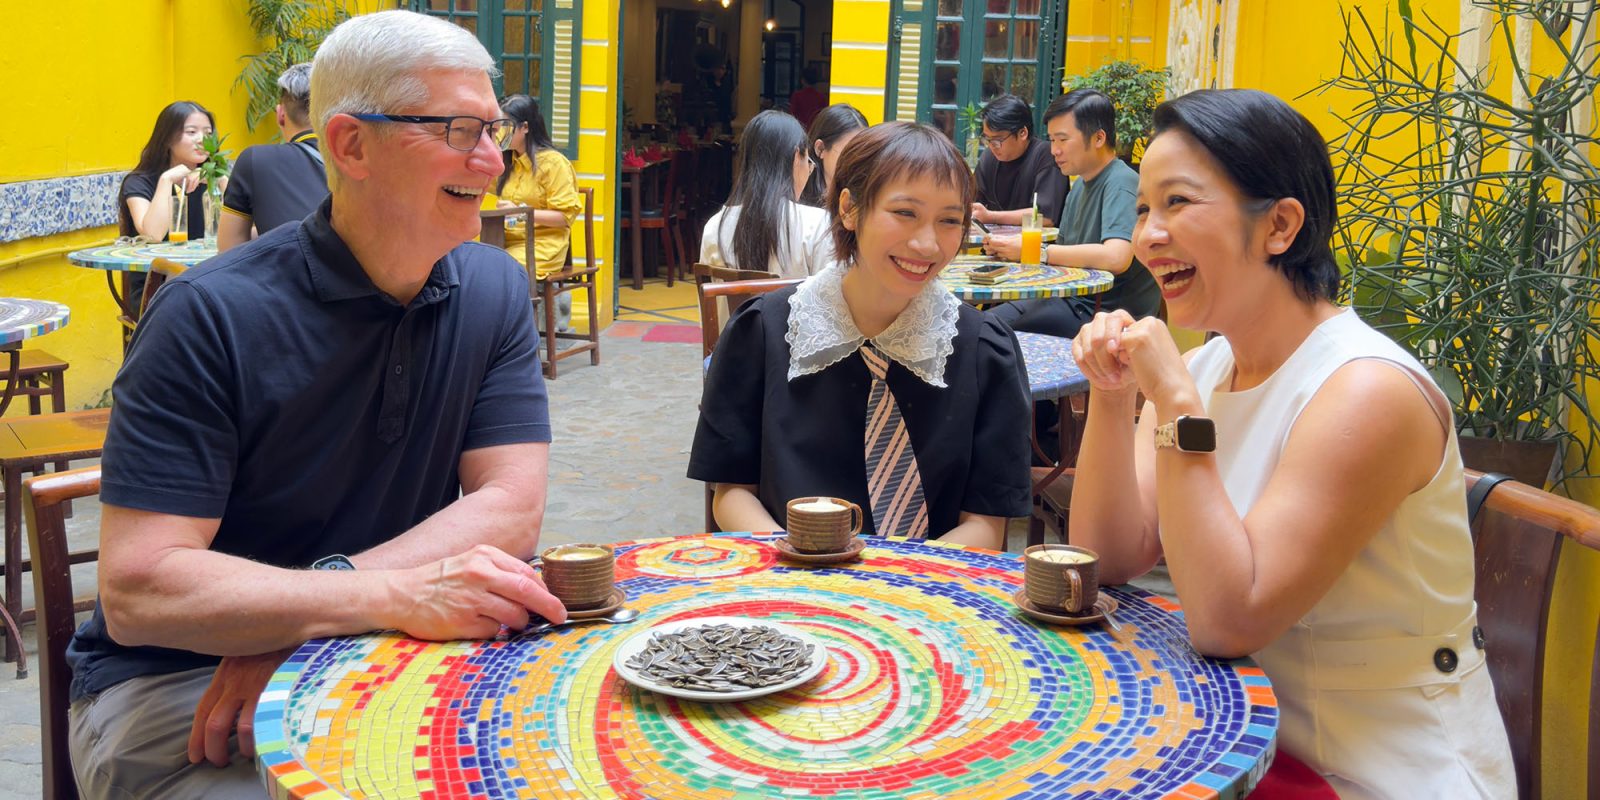 Apple Vietnam operations being expanded as Tim Cook visits